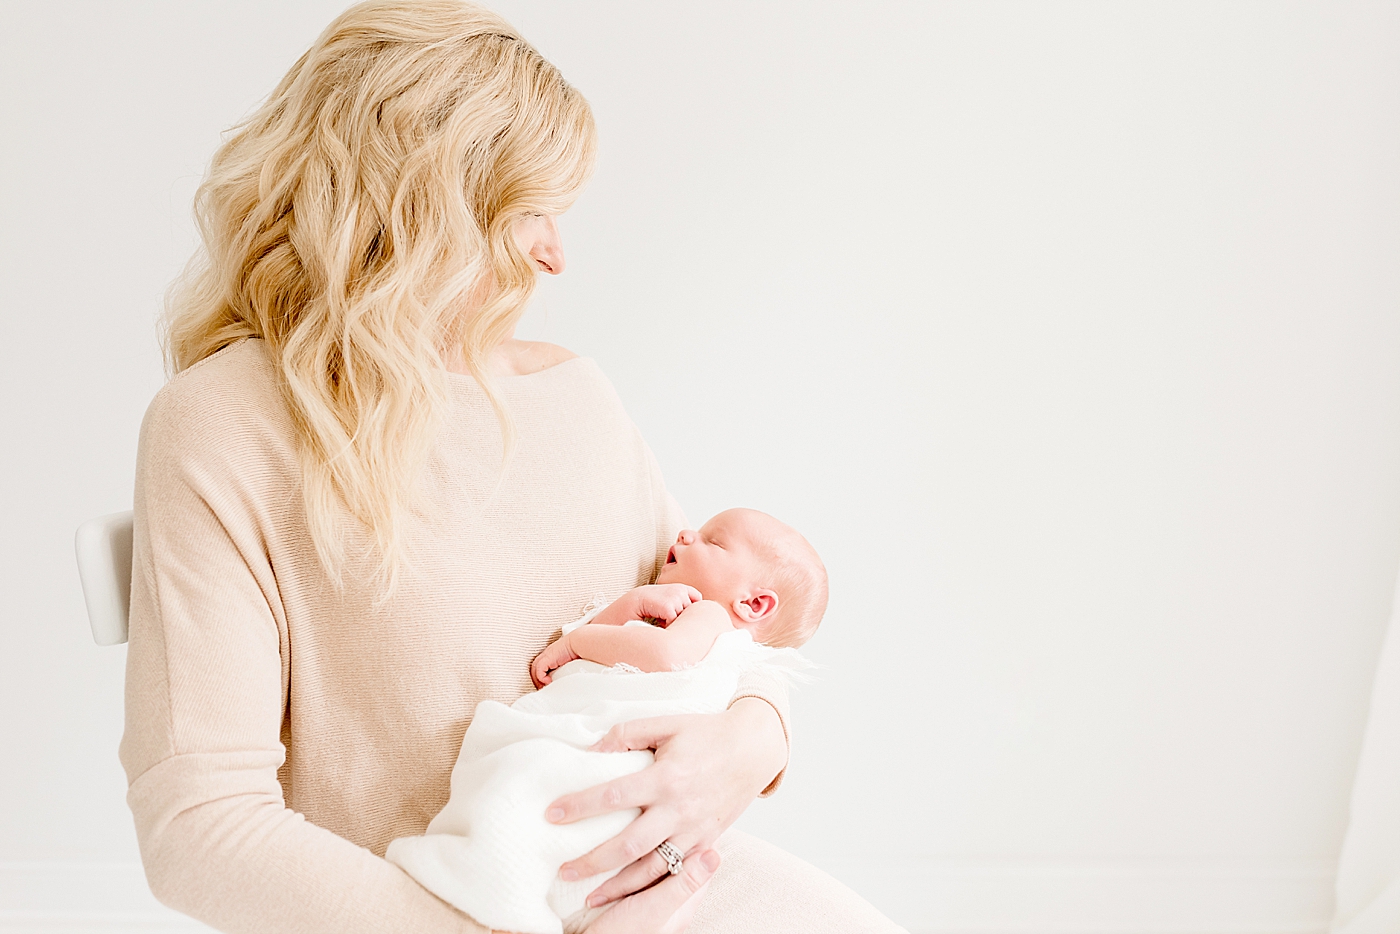 Mom holding newborn baby during studio session | Photo by Anna Wisjo Photography